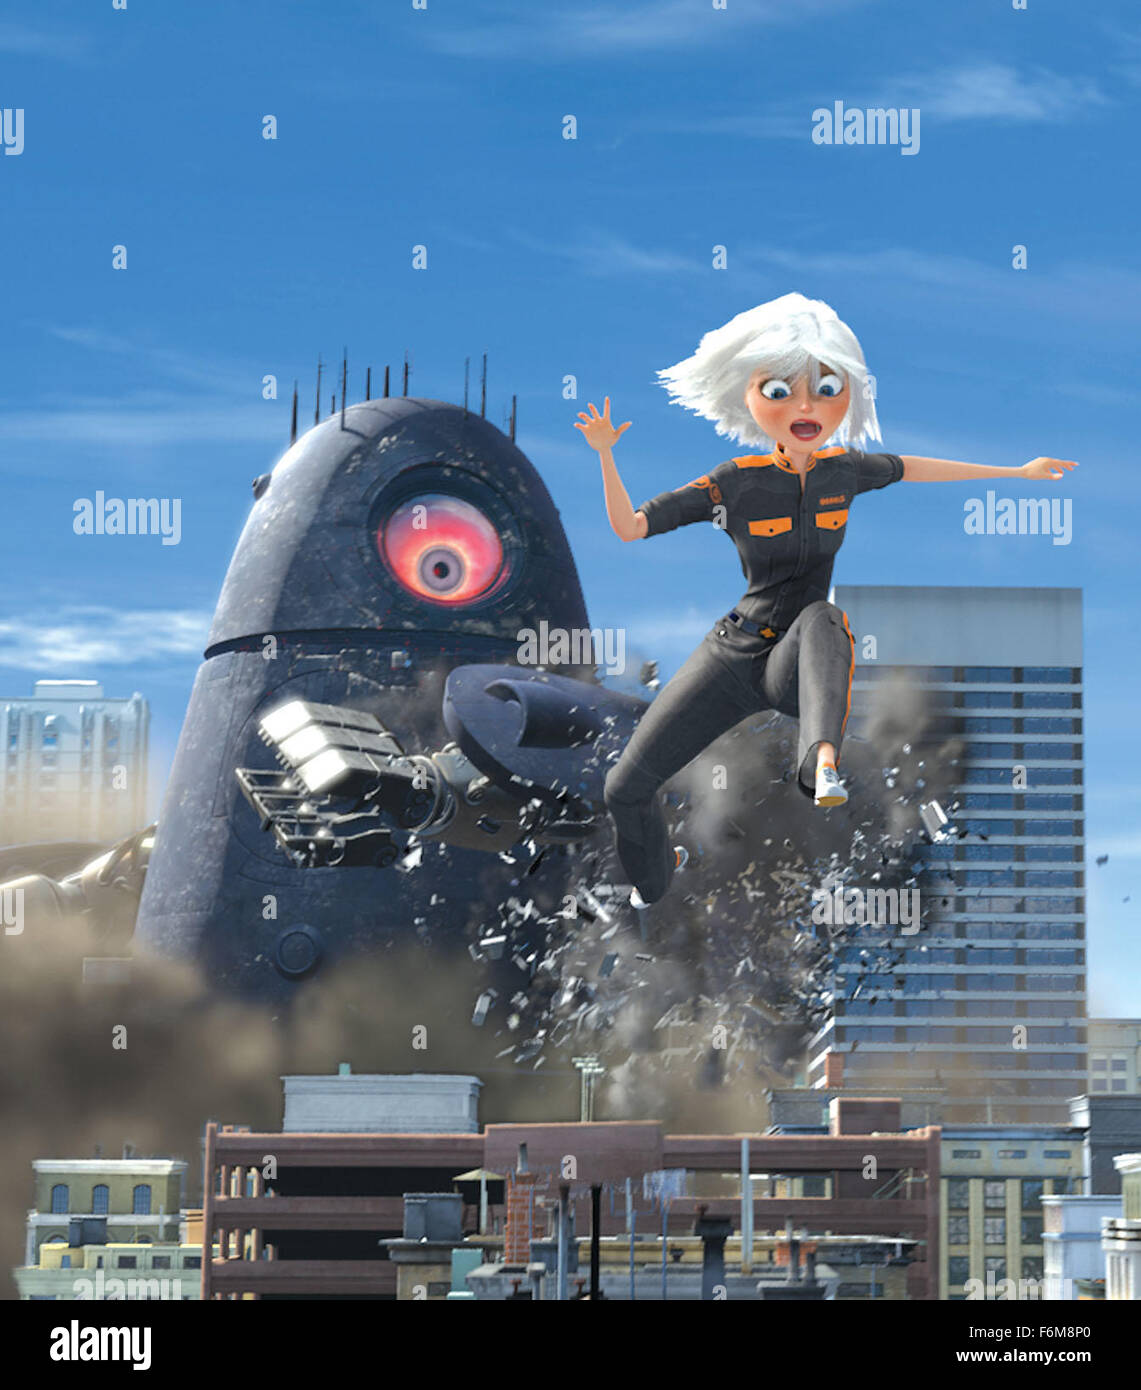 RELEASE DATE: 27 March 2009. MOVIE TITLE: Monsters vs. Aliens. STUDIO:  DreamWorks Animation. PLOT: When a meteorite from outer space hits a young  girl and turns her into a giant monster, she